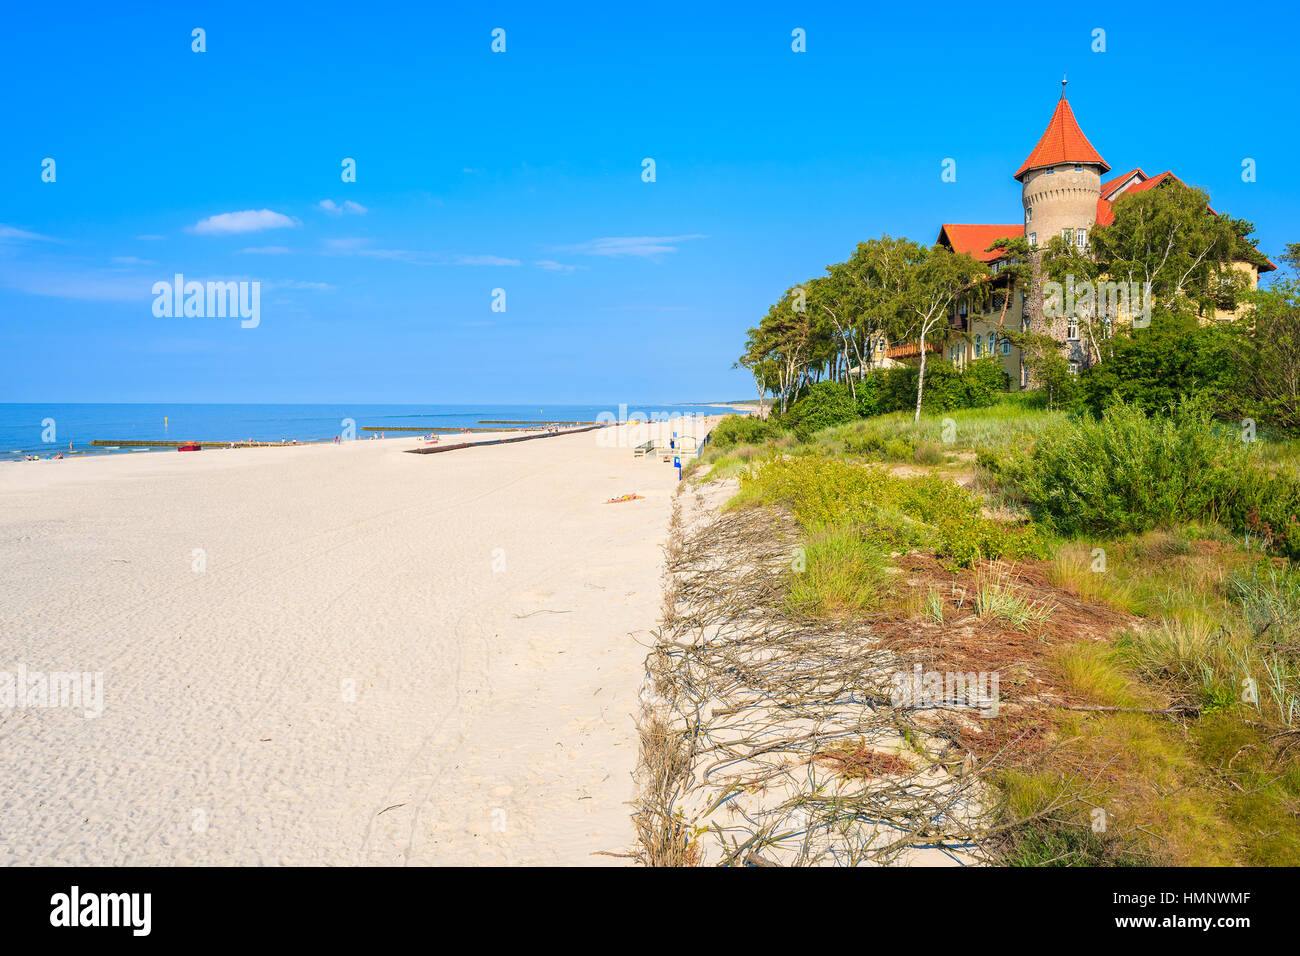 Sopot Beach High Resolution Stock Photography and Images - Alamy